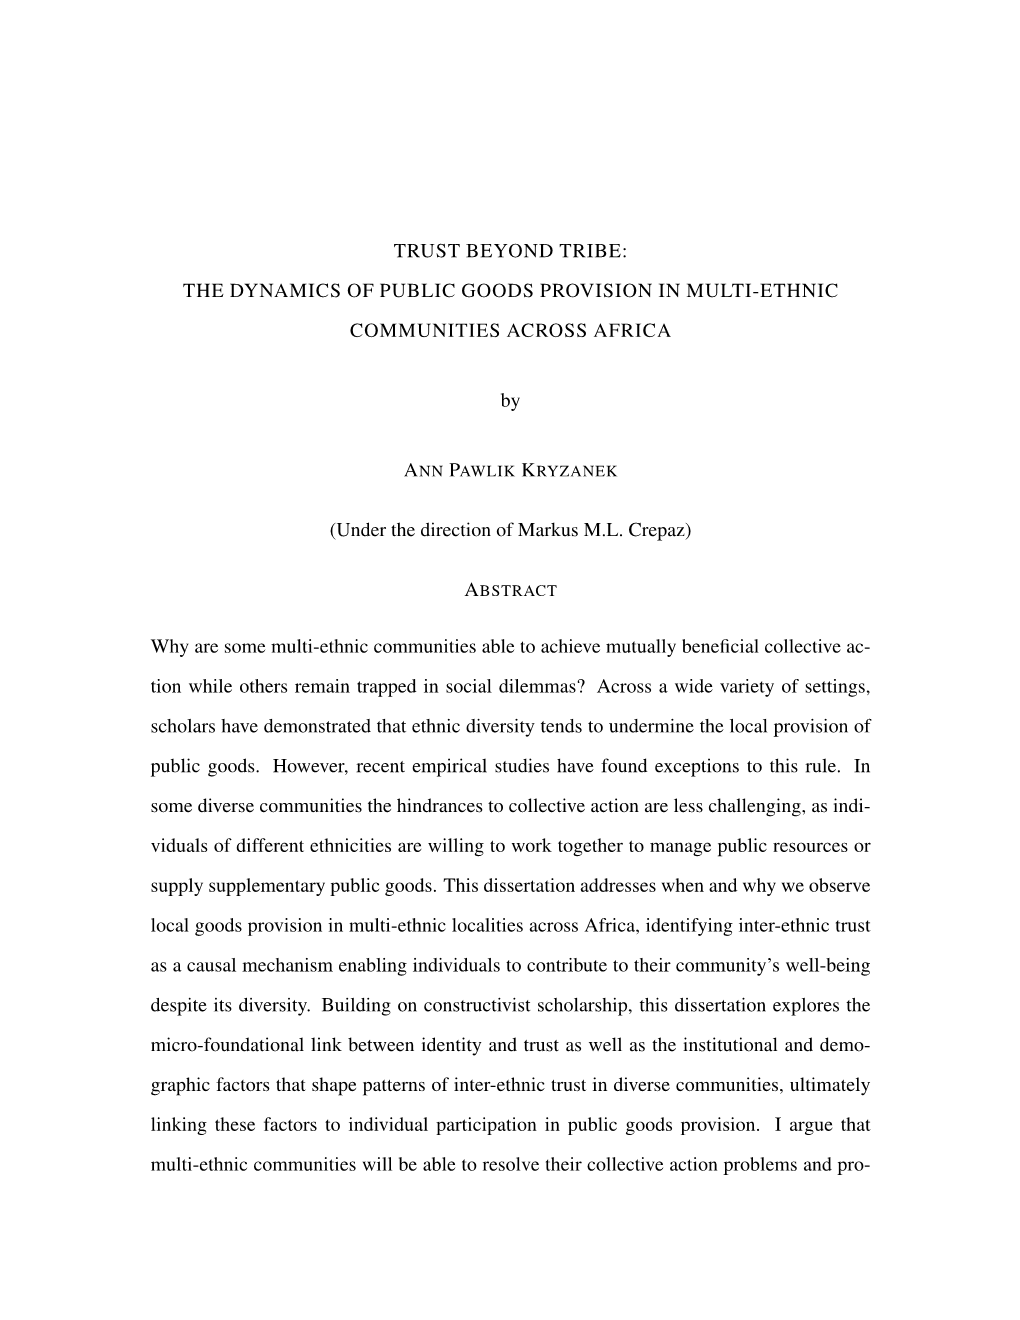 THE DYNAMICS of PUBLIC GOODS PROVISION in MULTI-ETHNIC COMMUNITIES ACROSS AFRICA by (Under the Direction Of